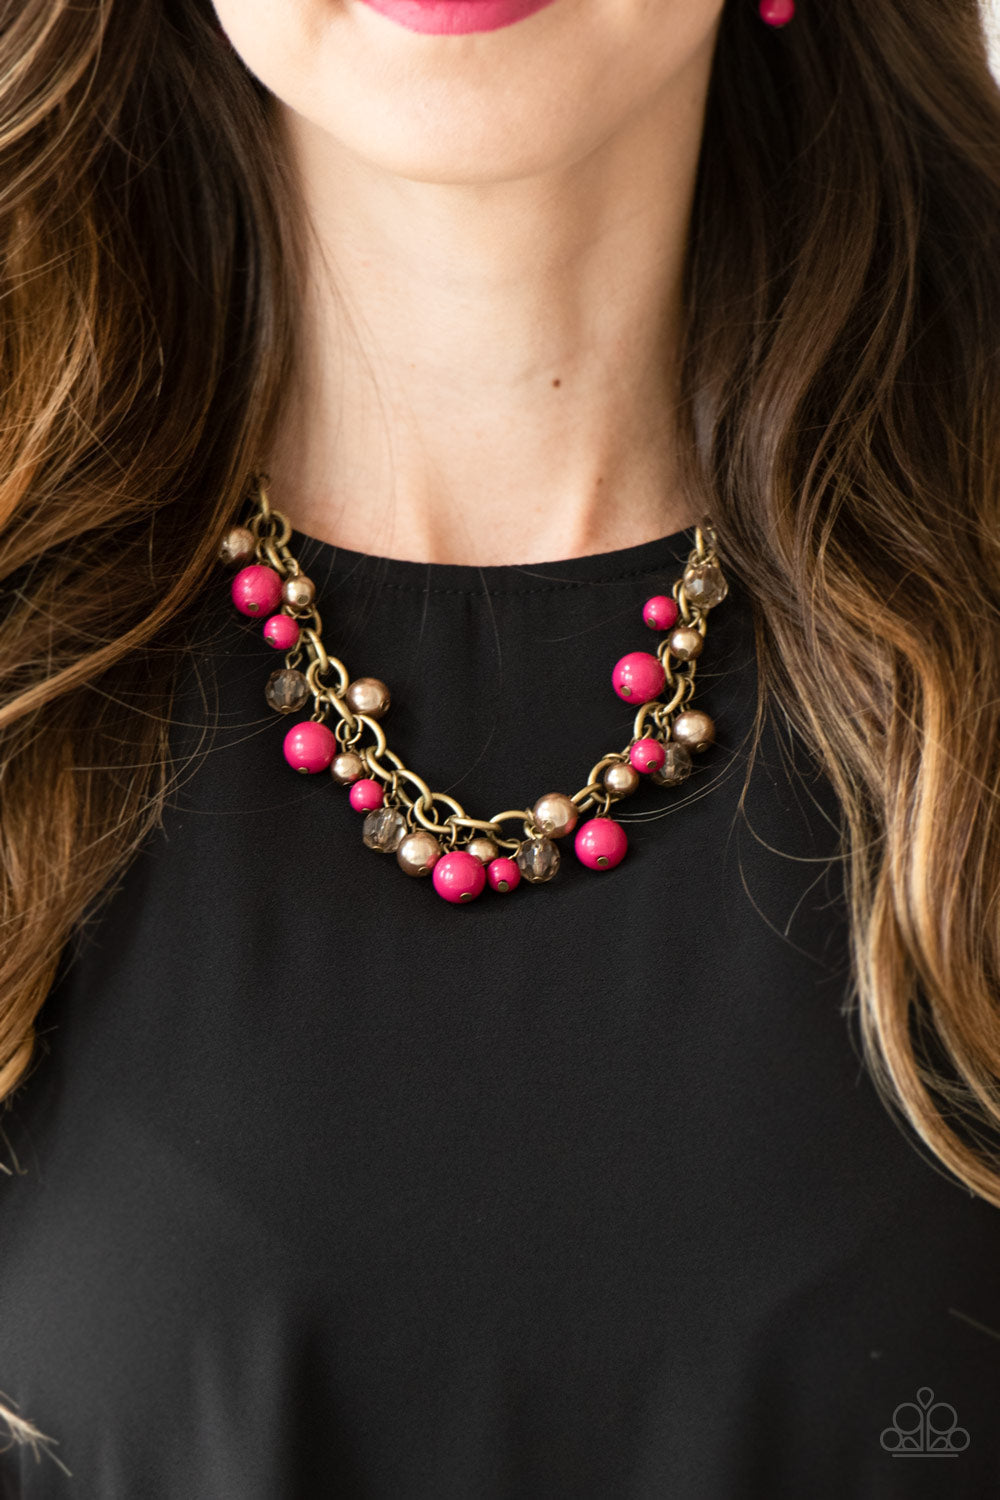 The GRIT Crowd - Pink and Brass Necklace - Paparazzi Accessories - Pearly brass, polished pink, and glittery crystal-like beads swing from a bold brass chain, creating a refined fringe below the collar. Features an adjustable clasp closure.